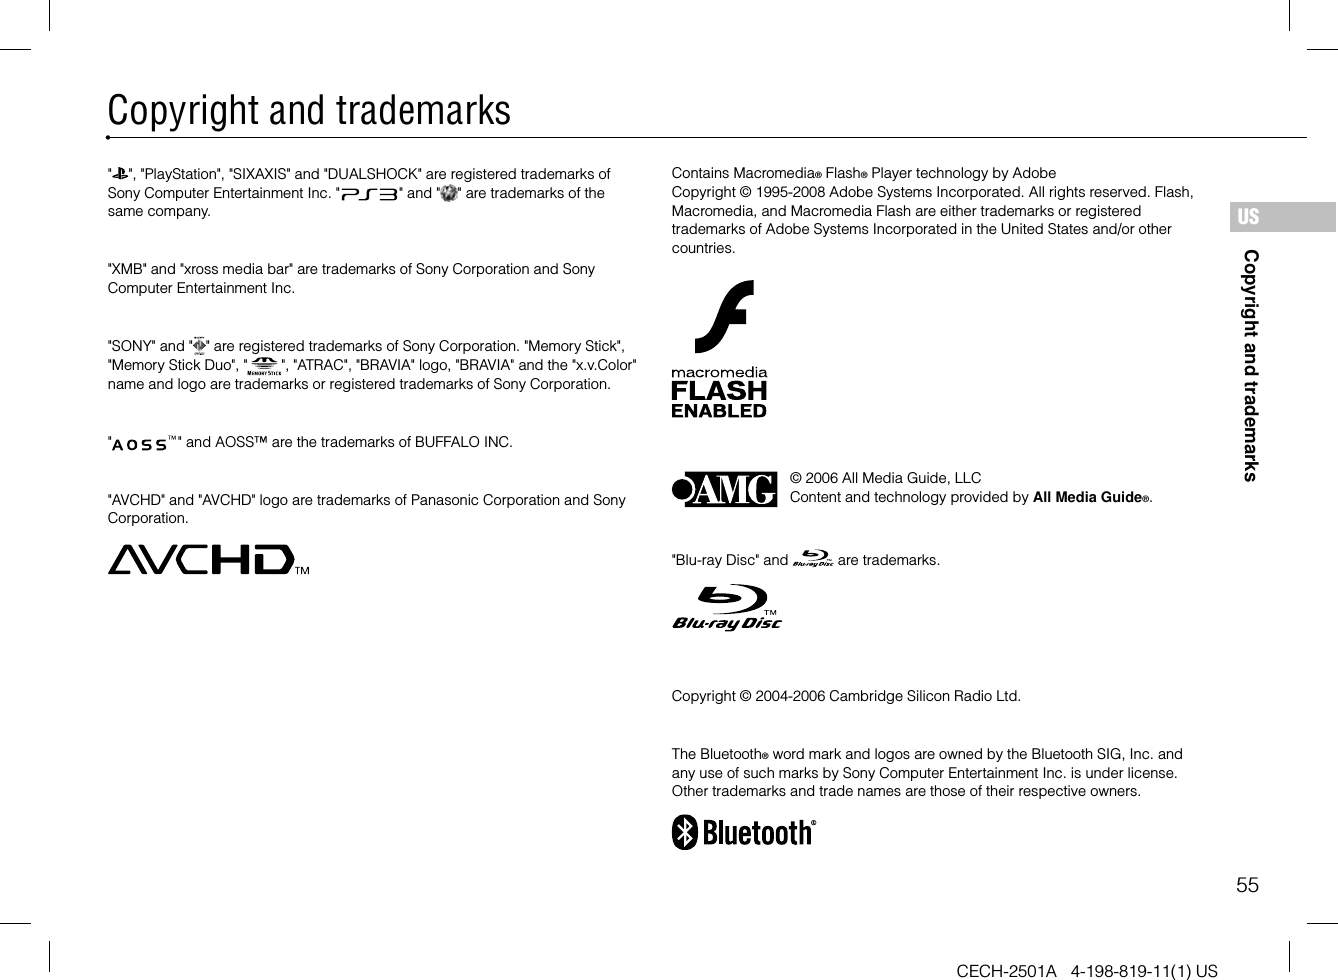 55Copyright and trademarksCECH-2501A   4-198-819-11(1) USCopyright and trademarksUS&quot; &quot;, &quot;PlayStation&quot;, &quot;SIXAXIS&quot; and &quot;DUALSHOCK&quot; are registered trademarks of Sony Computer Entertainment Inc. &quot; &quot; and &quot; &quot; are trademarks of the same company.&quot;XMB&quot; and &quot;xross media bar&quot; are trademarks of Sony Corporation and Sony Computer Entertainment Inc.&quot;SONY&quot; and &quot; &quot; are registered trademarks of Sony Corporation. &quot;Memory Stick&quot;, &quot;Memory Stick Duo&quot;, &quot; &quot;, &quot;ATRAC&quot;, &quot;BRAVIA&quot; logo, &quot;BRAVIA&quot; and the &quot;x.v.Color&quot; name and logo are trademarks or registered trademarks of Sony Corporation.&quot; &quot; and AOSS™ are the trademarks of BUFFALO INC.&quot;AVCHD&quot; and &quot;AVCHD&quot; logo are trademarks of Panasonic Corporation and Sony Corporation.Contains Macromedia® Flash® Player technology by AdobeCopyright © 1995-2008 Adobe Systems Incorporated. All rights reserved. Flash, Macromedia, and Macromedia Flash are either trademarks or registered trademarks of Adobe Systems Incorporated in the United States and/or other countries.© 2006 All Media Guide, LLCContent and technology provided by All Media Guide®.&quot;Blu-ray Disc&quot; and   are trademarks.Copyright © 2004-2006 Cambridge Silicon Radio Ltd.The Bluetooth® word mark and logos are owned by the Bluetooth SIG, Inc. and any use of such marks by Sony Computer Entertainment Inc. is under license. Other trademarks and trade names are those of their respective owners.